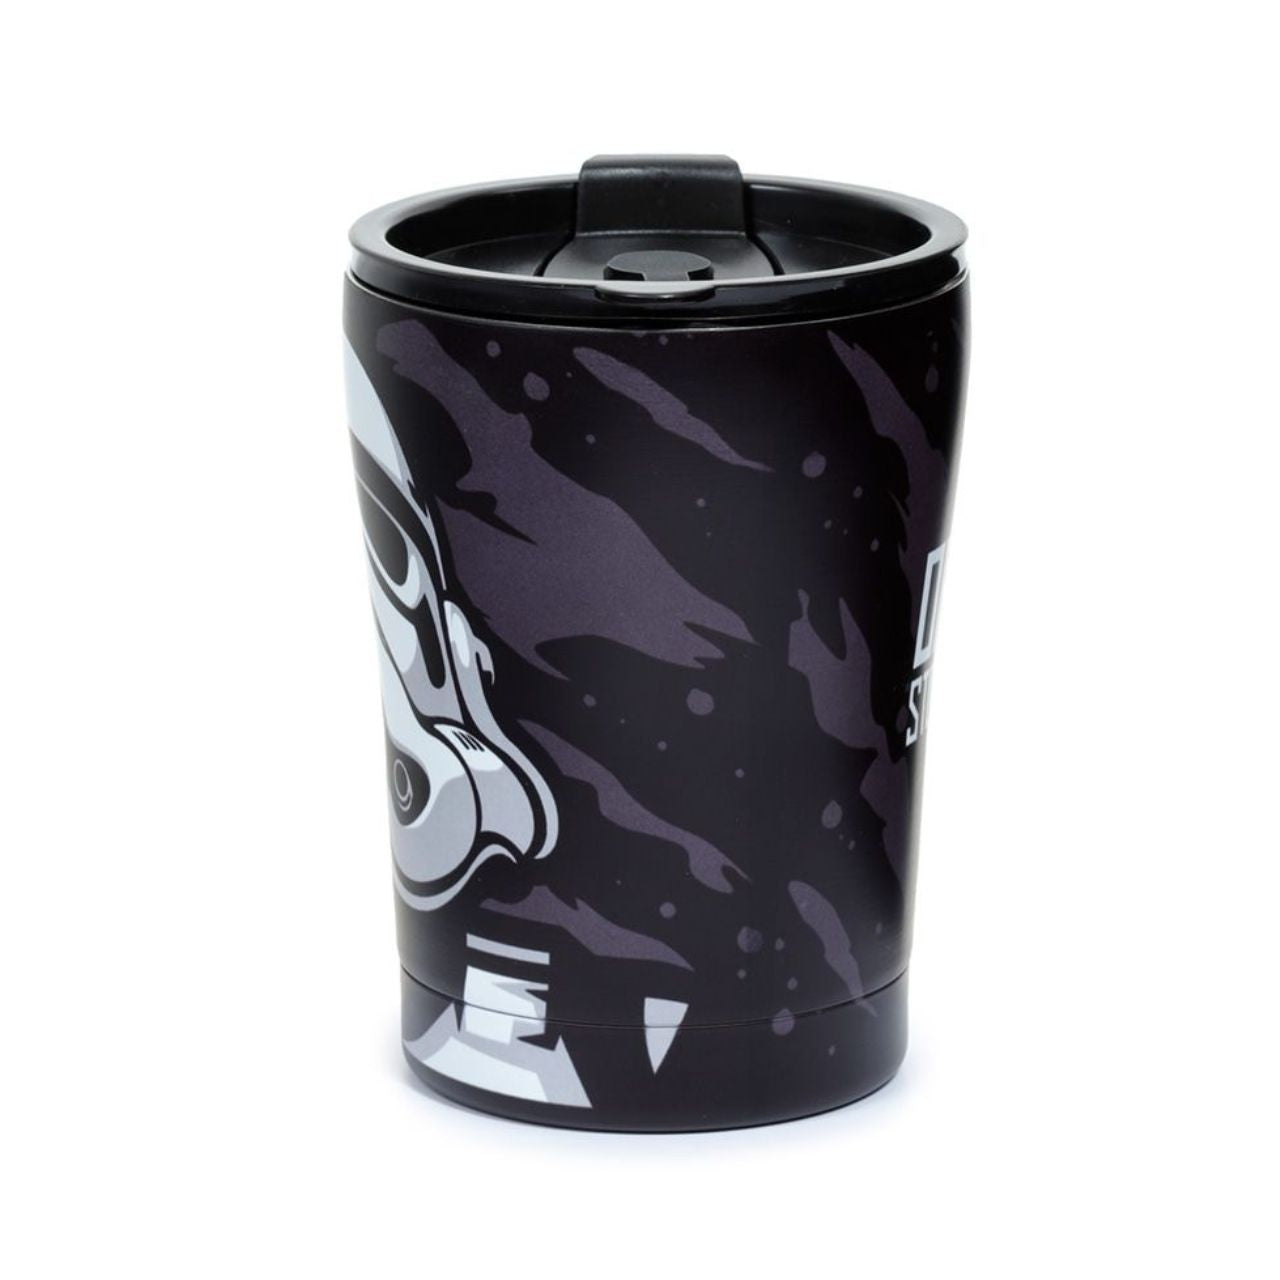 The Original Stormtrooper Hot & Cold Insulated Cup 300ml   Insulated design suitable for hot and cold drinks. Thermal design keeps liquids cold for up to 8 hours or warm for up to 6 hours. The lid has a steam release valve in the centre and a secure flip up cover over the drinking hole.